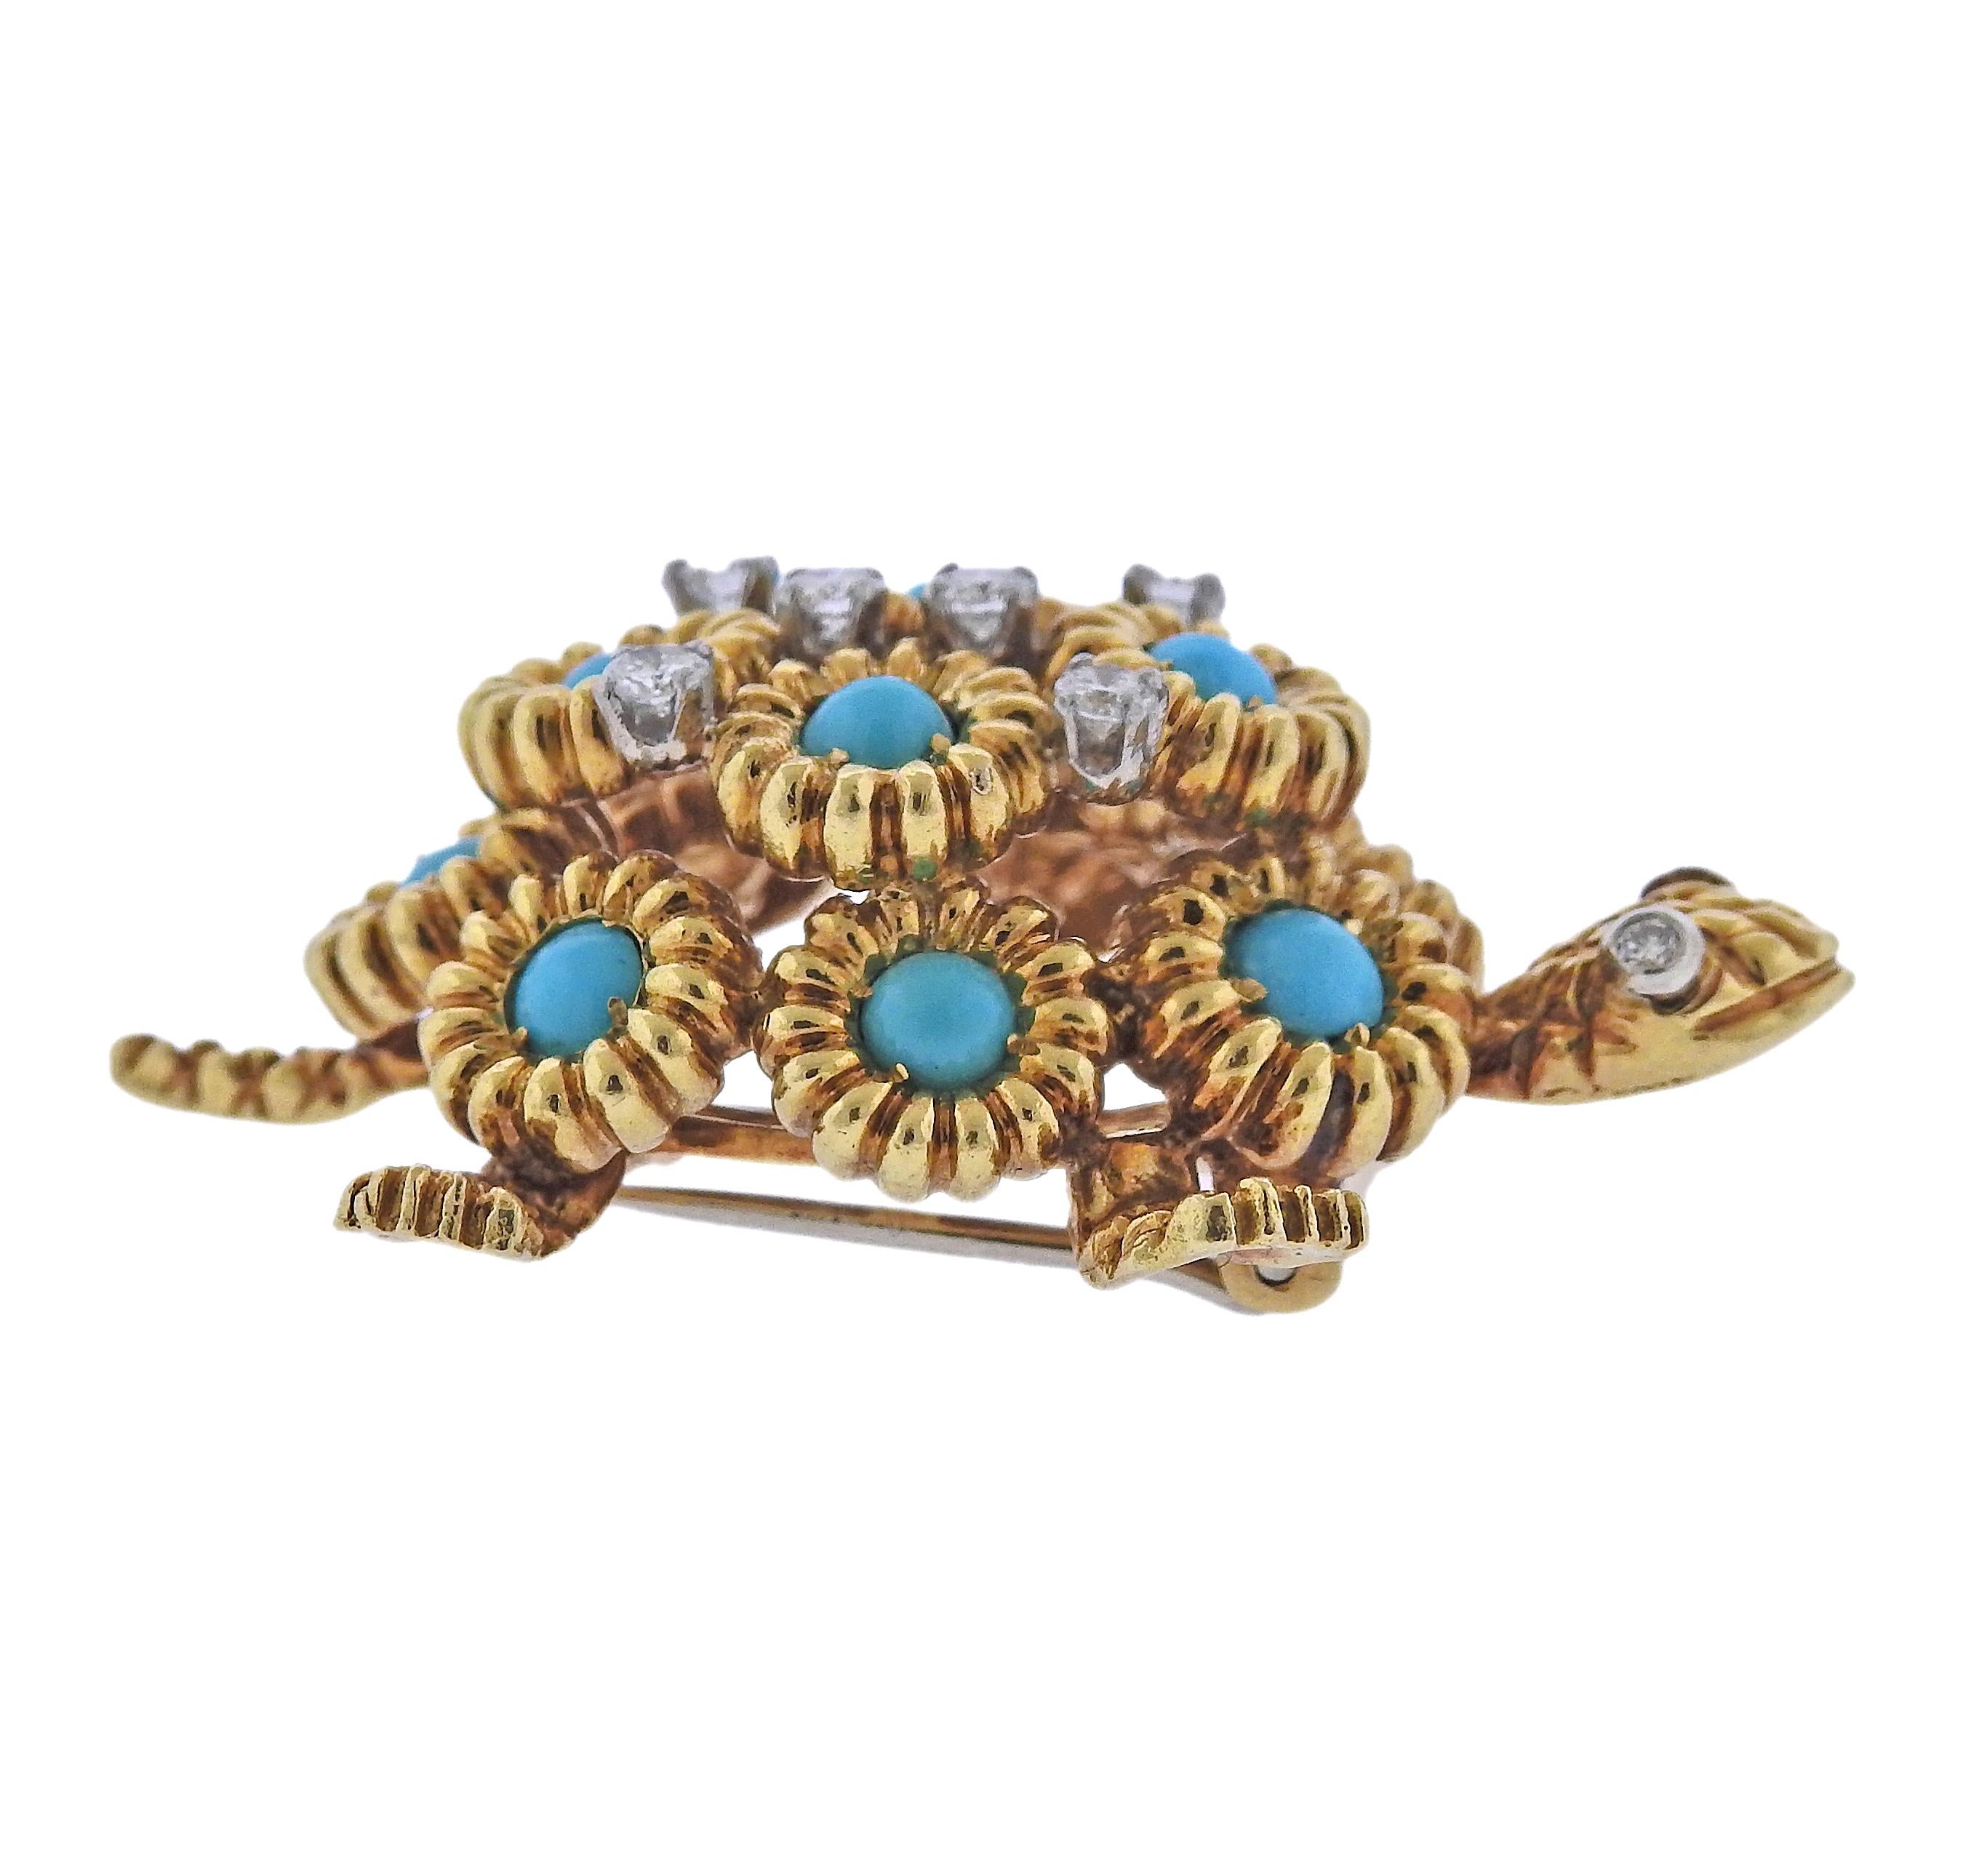 Vintage, circa 1960s 18k gold turtle brooch, adorned with turquoise and approx. 0.38ctw in Si1/H diamonds.  Brooch is 41mm x 26mm. Weight - 20.2 grams. Marked: 7603 NM. 